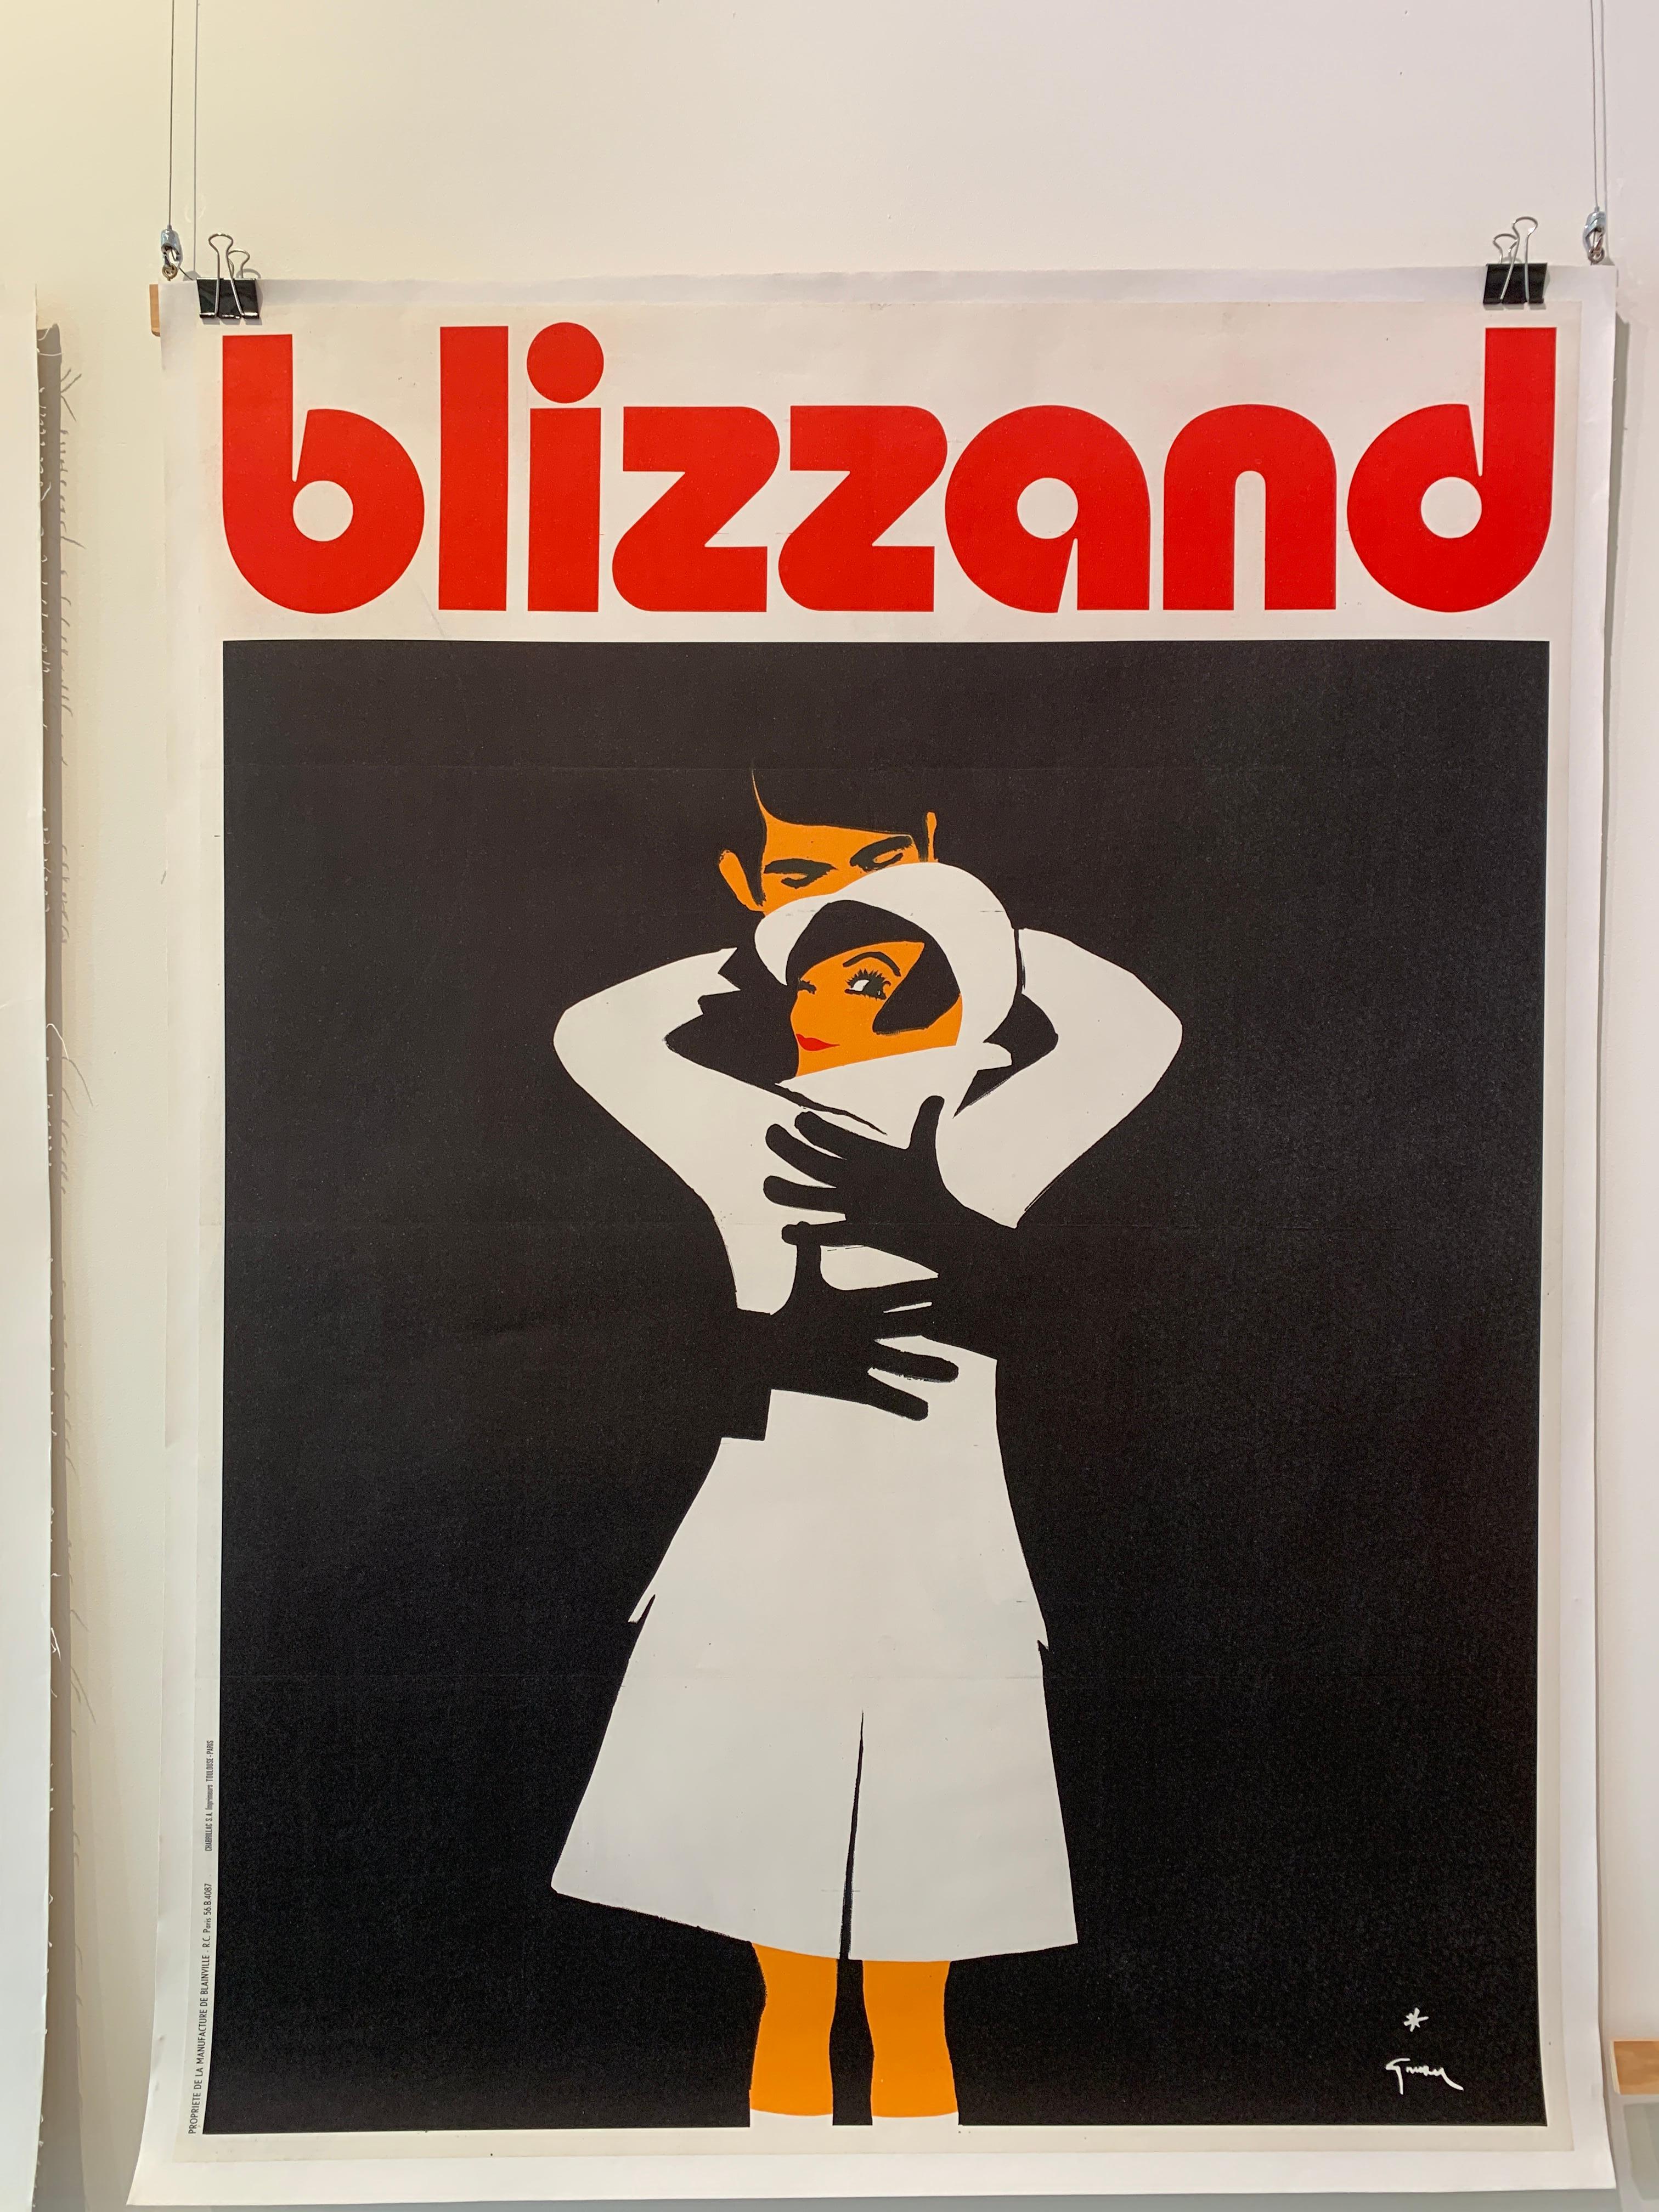 Extremely rare poster by Rene Gruau for ‘Blizzand’ raincoats, this elegant design by the Italian illustrator embodies the sophistication the brand strived to promote. The mysterious man in black and the cheeky wink suggests a romance from another